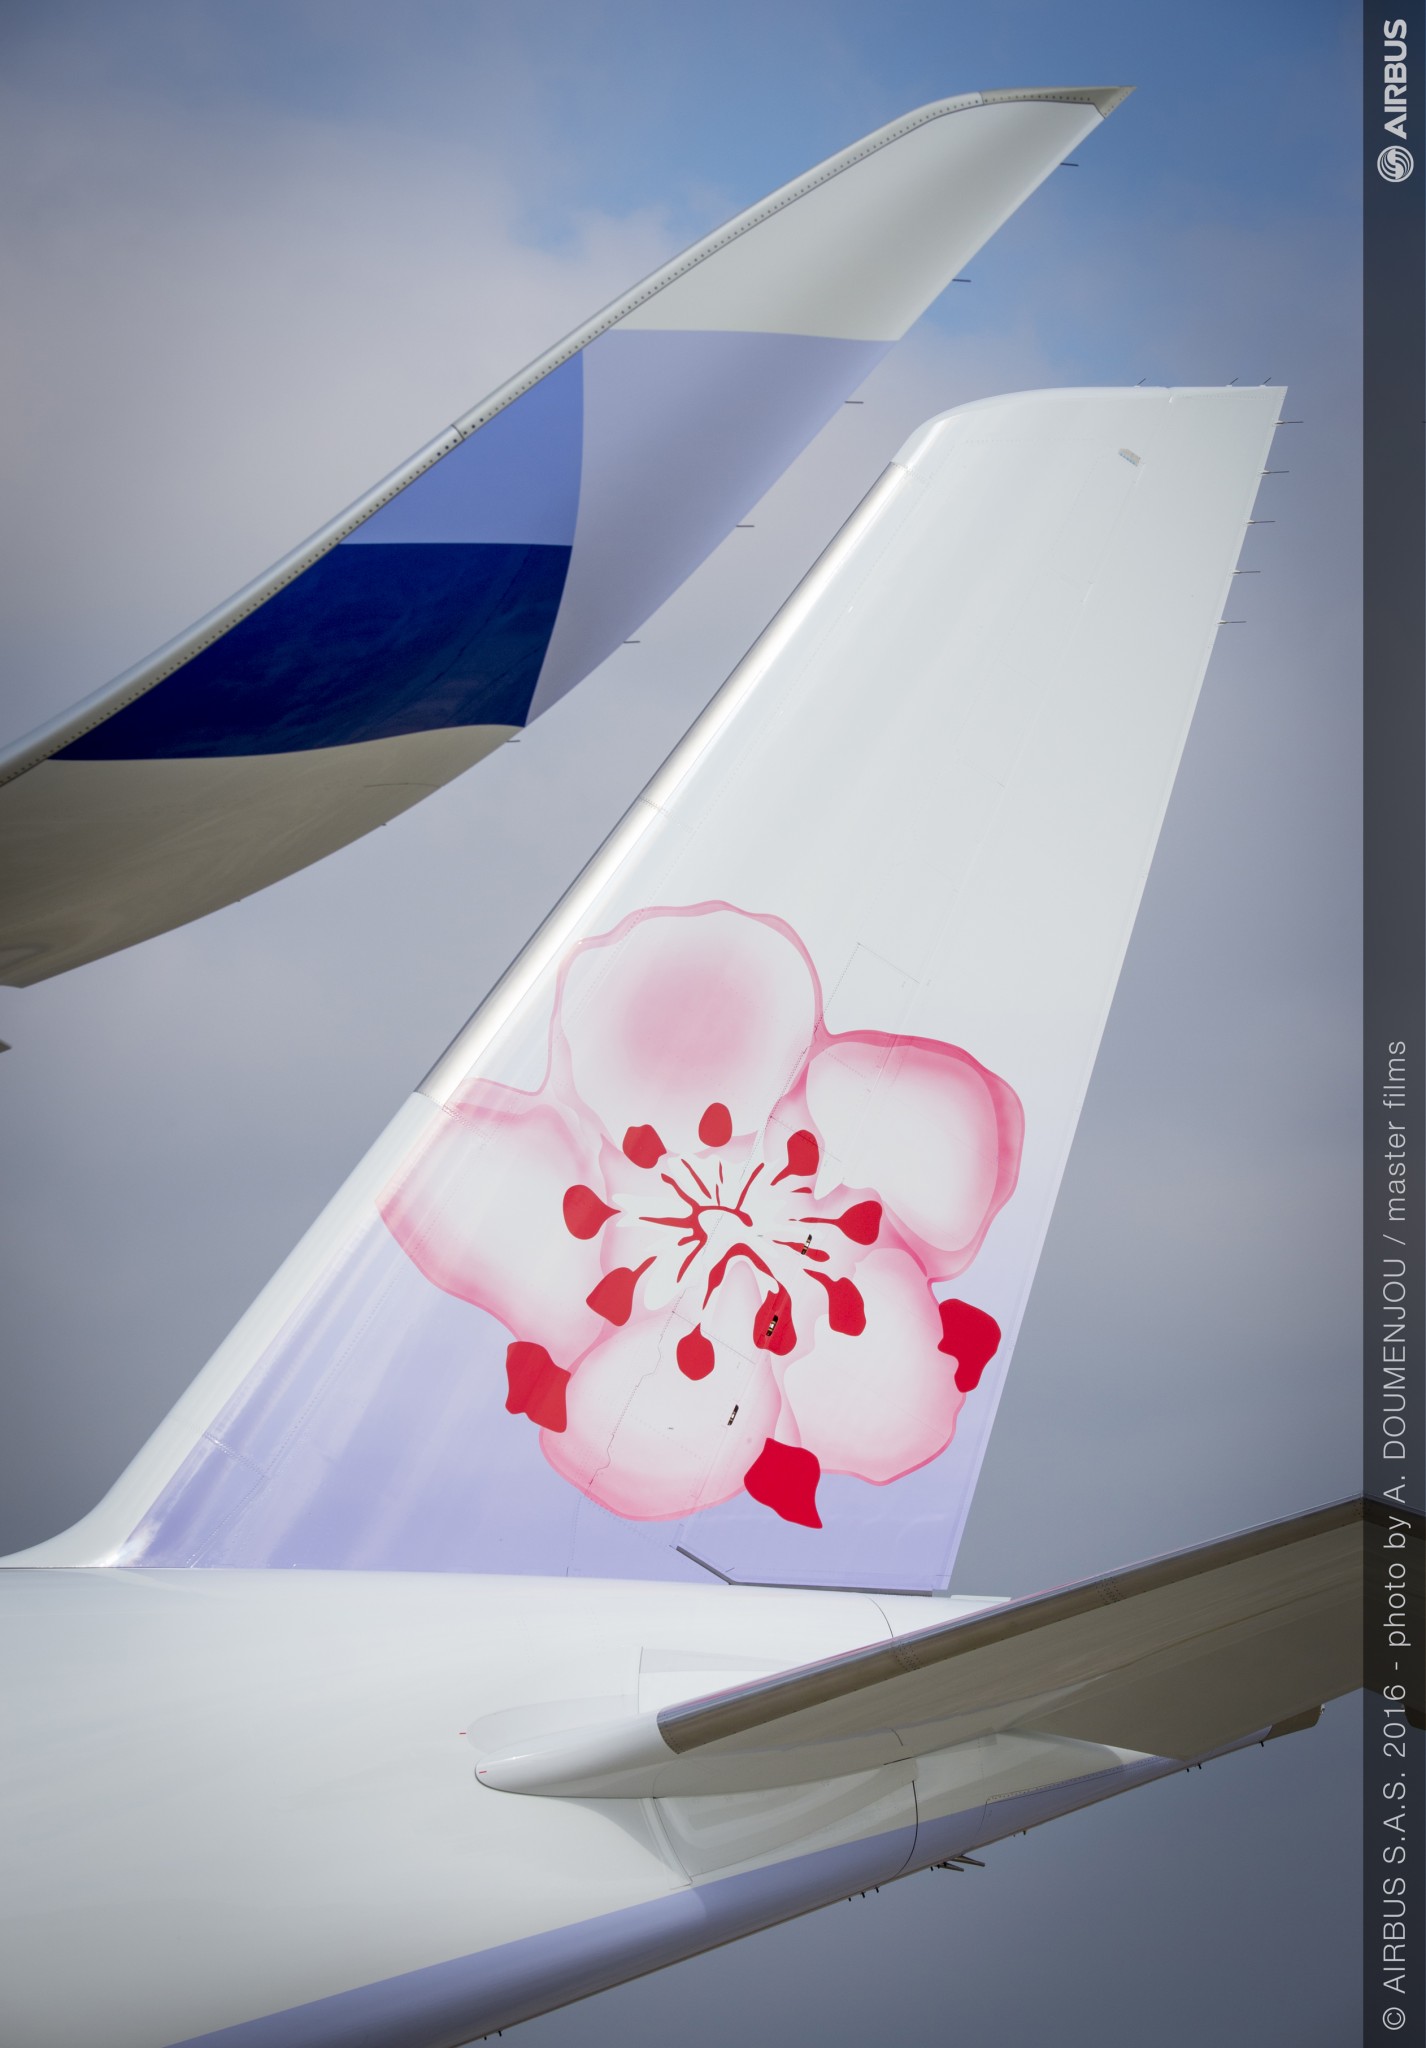 China Airlines performs first A350-900XWB flight